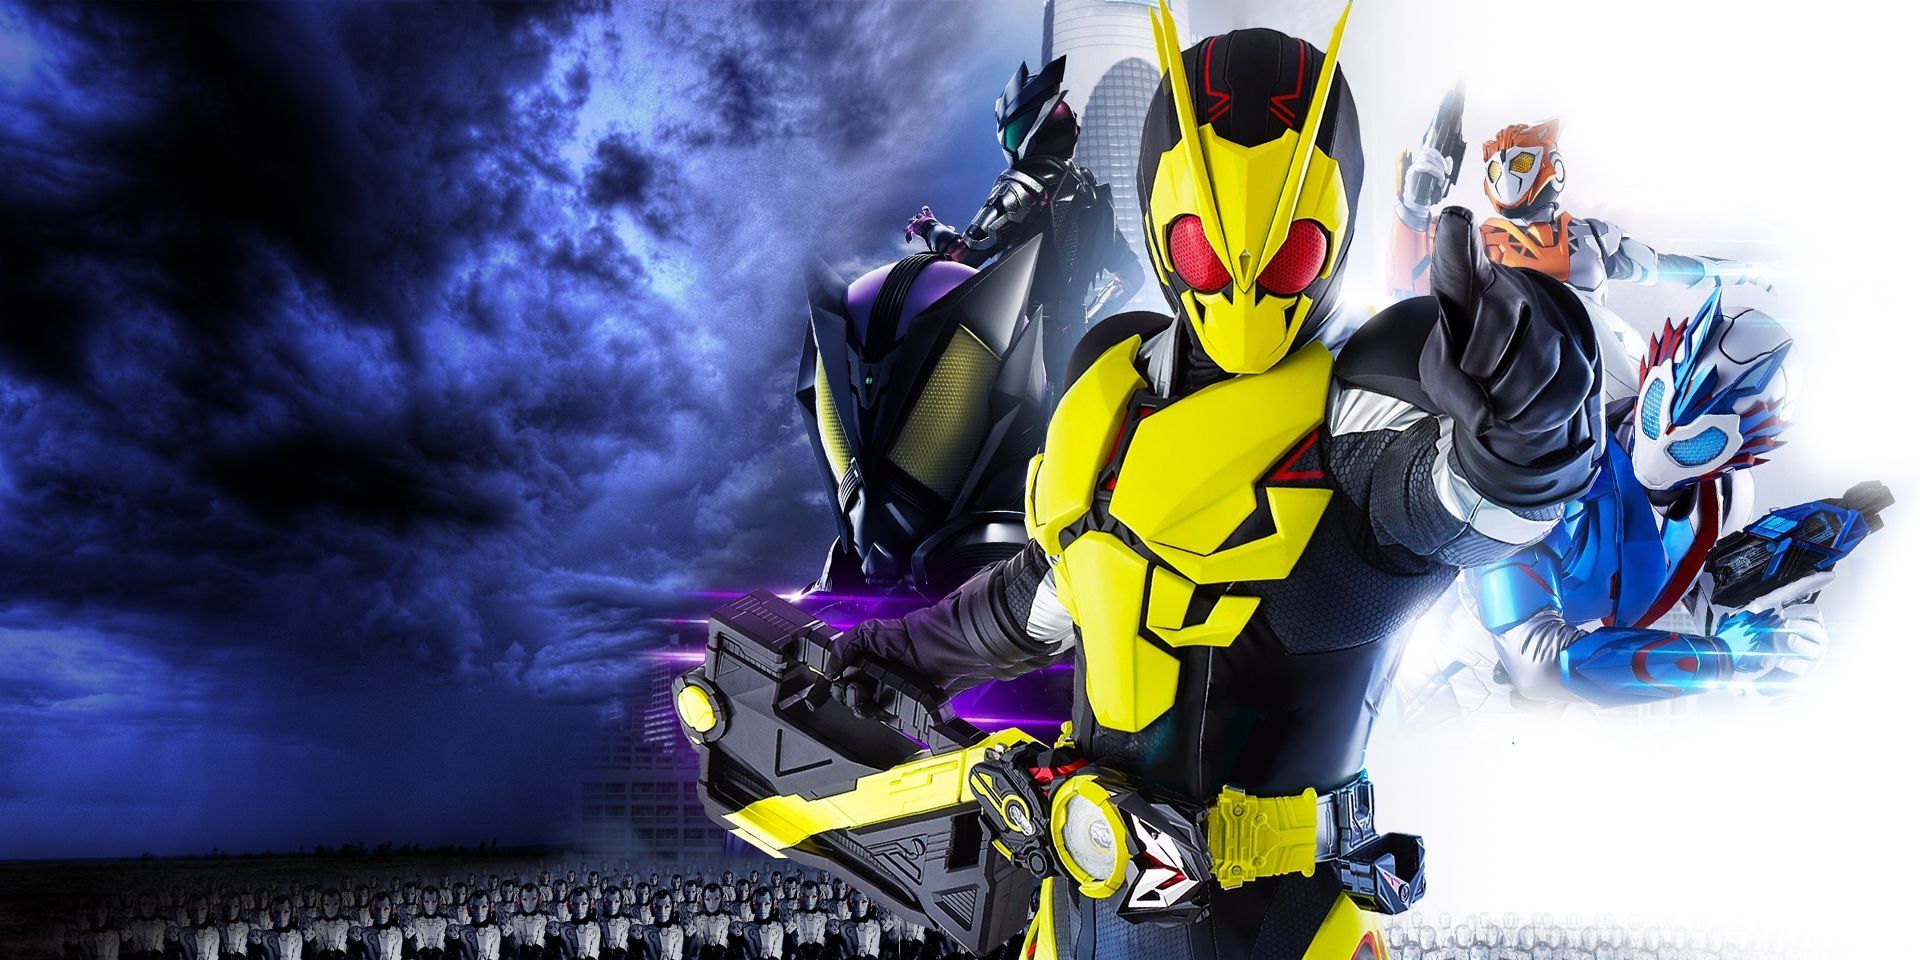 The characters of Kamen Rider Zero-One are featured in various poses ahead of a dark sky on one side and white light on another